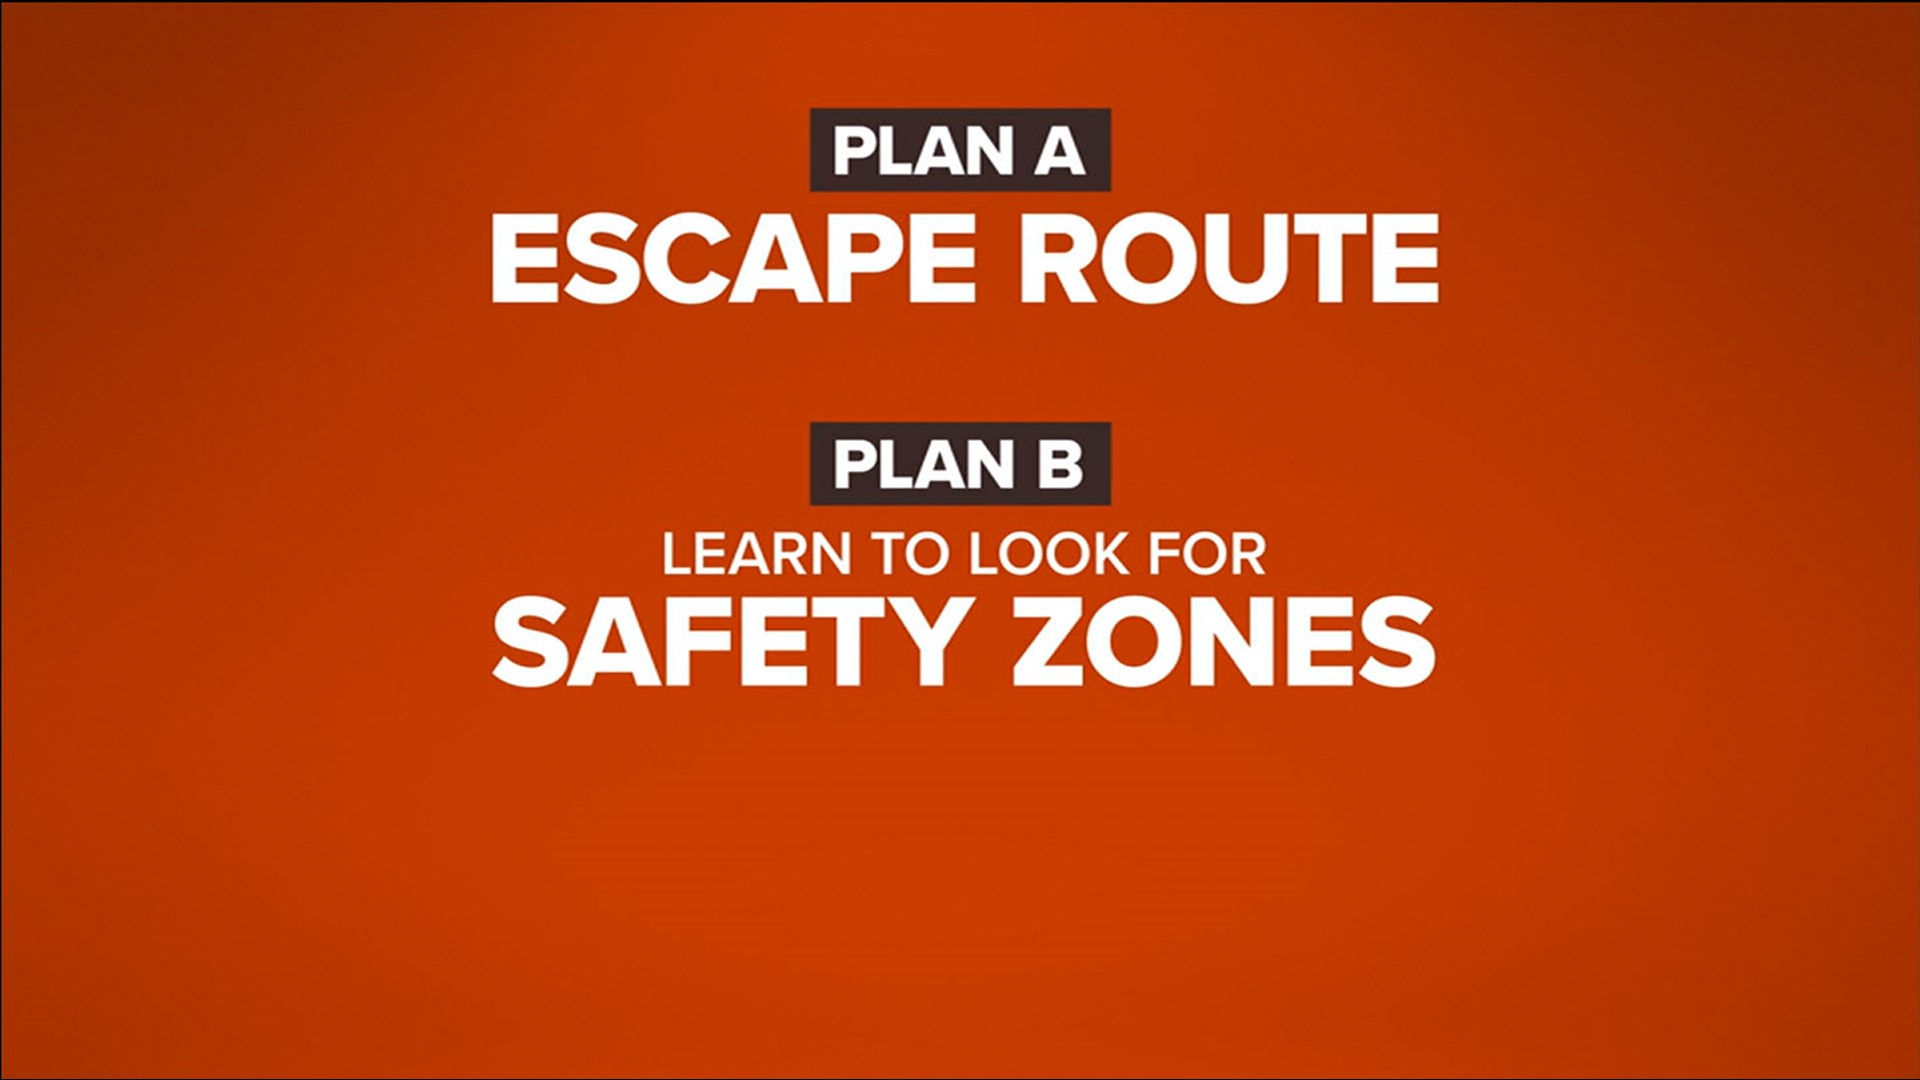 Getting as far away from a fire as possible isn't always the best option to survive one. Sometimes you will need to find an escape route or a safety zone.